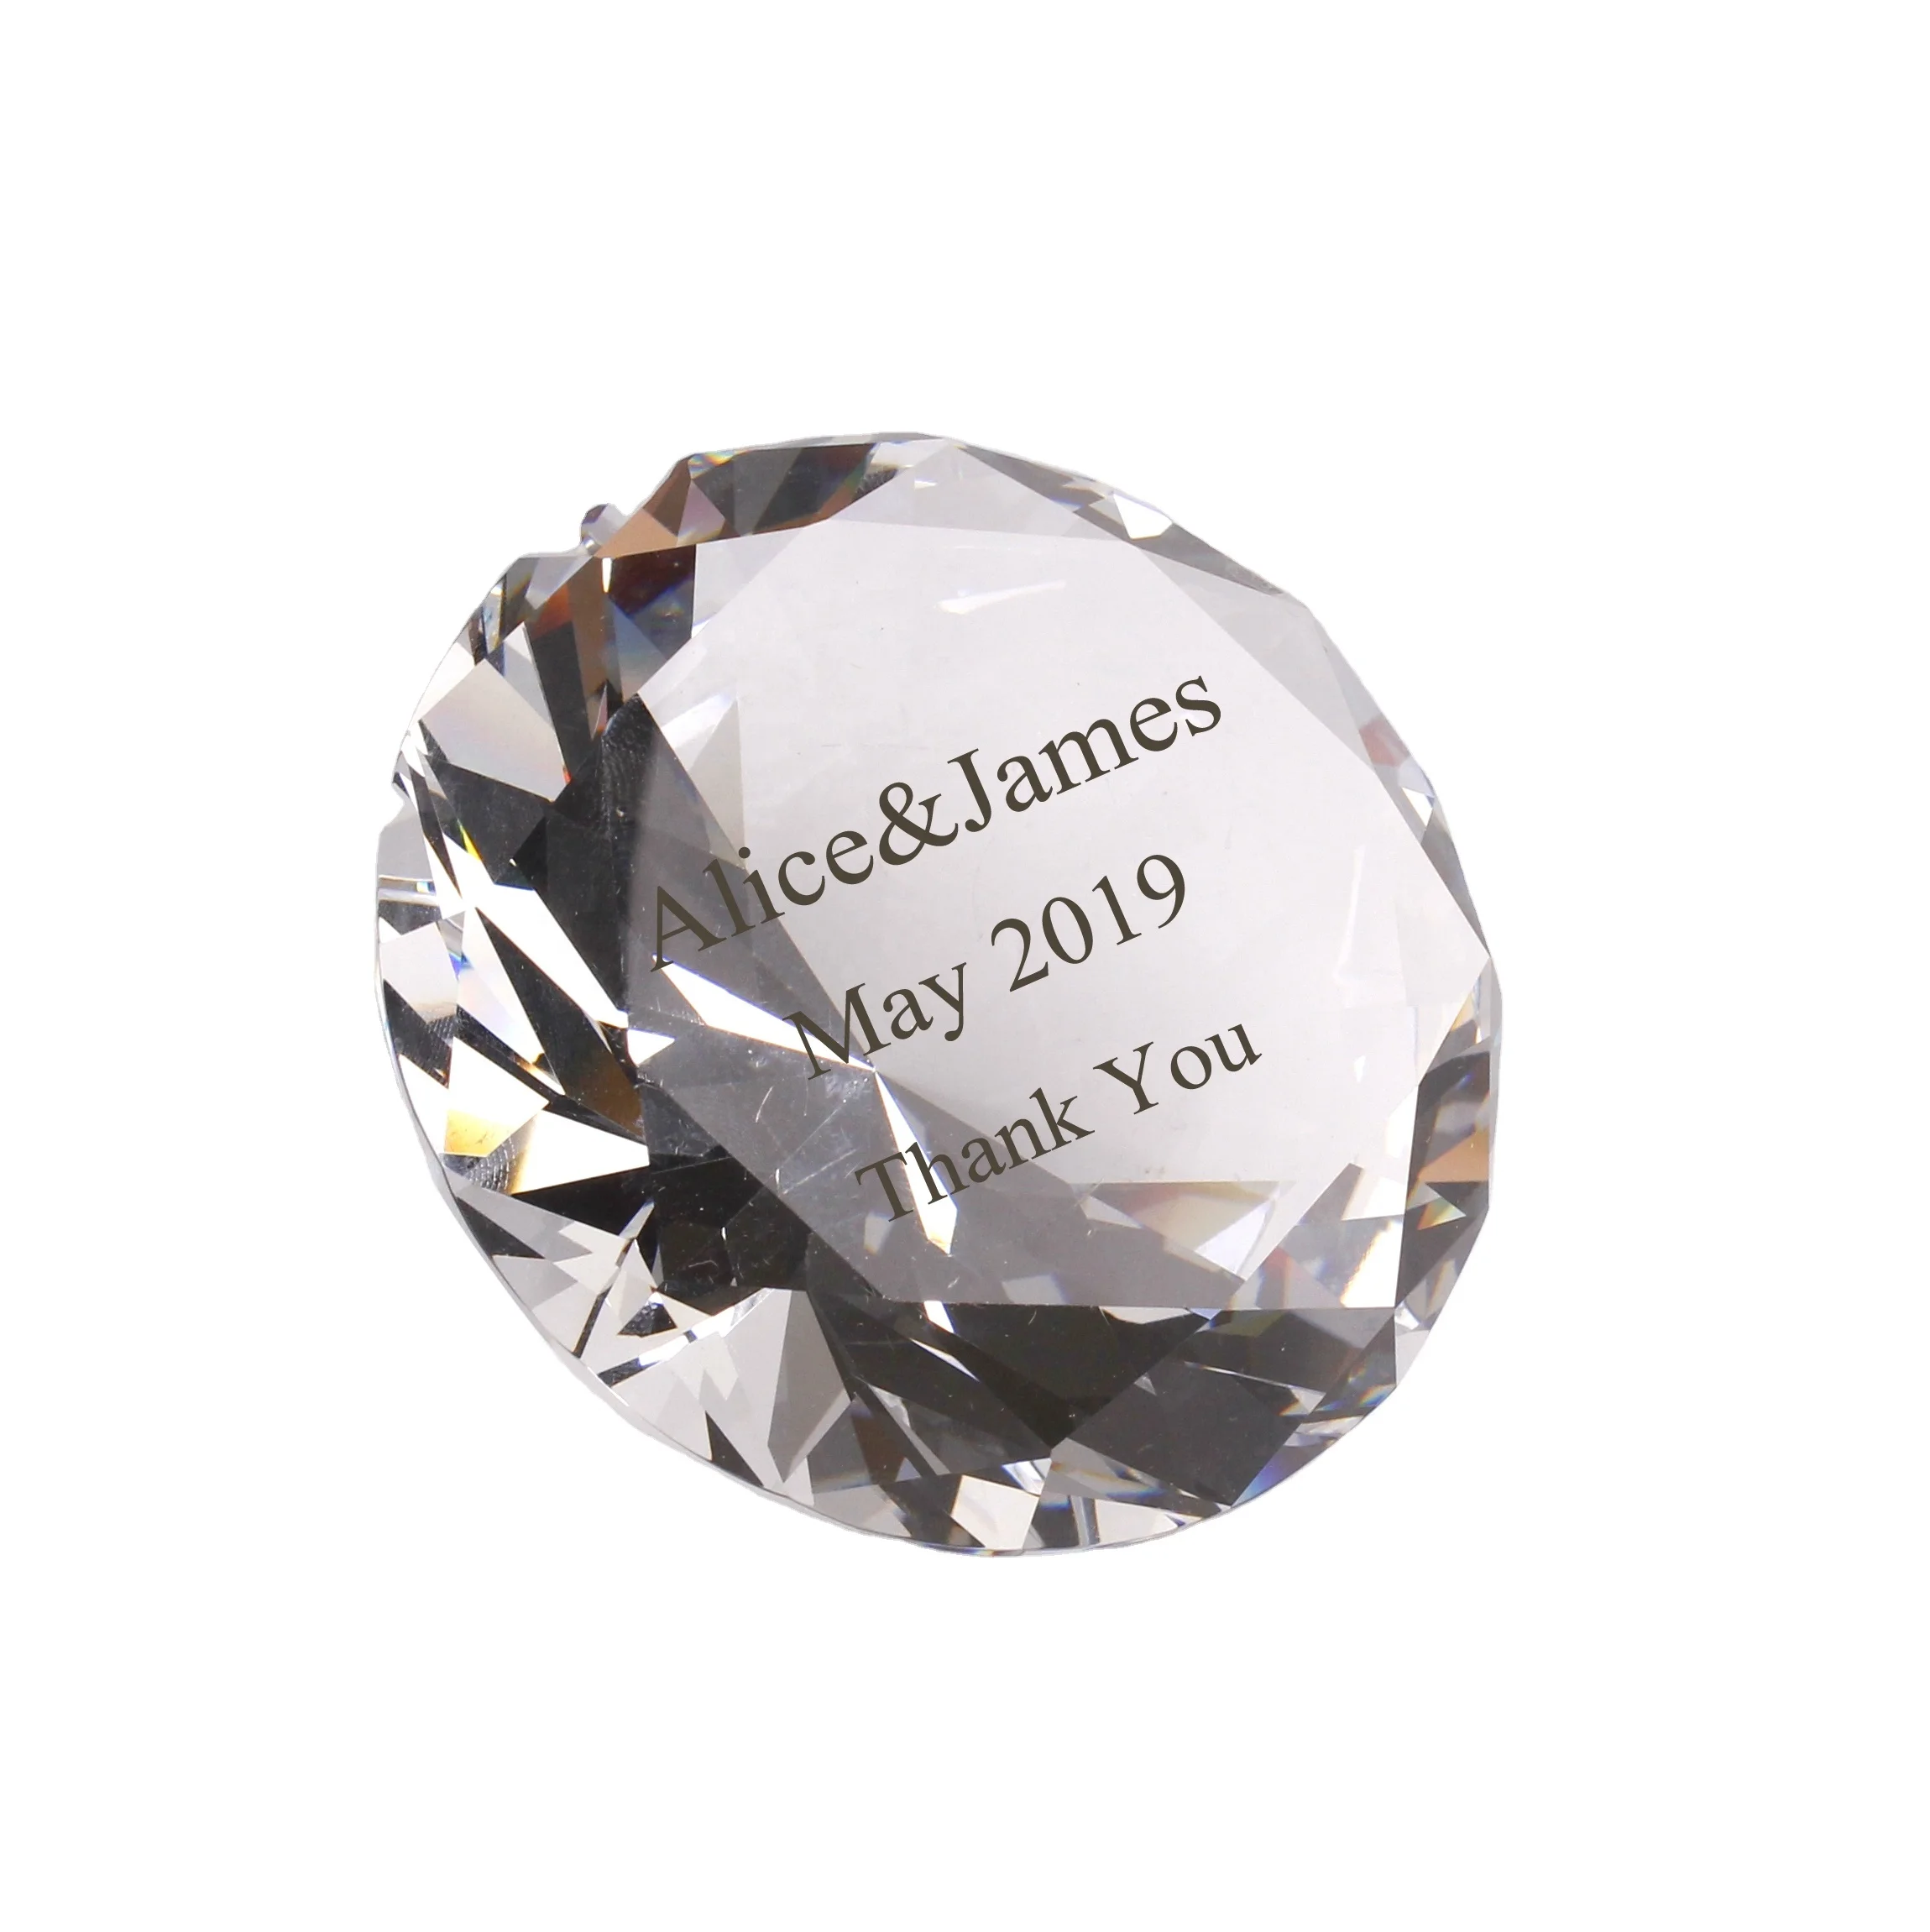 60mm Clear Glass Diamond Shaped Paperweight with own personalised engraving up to 20 letters Complete with Gift Box DIA60